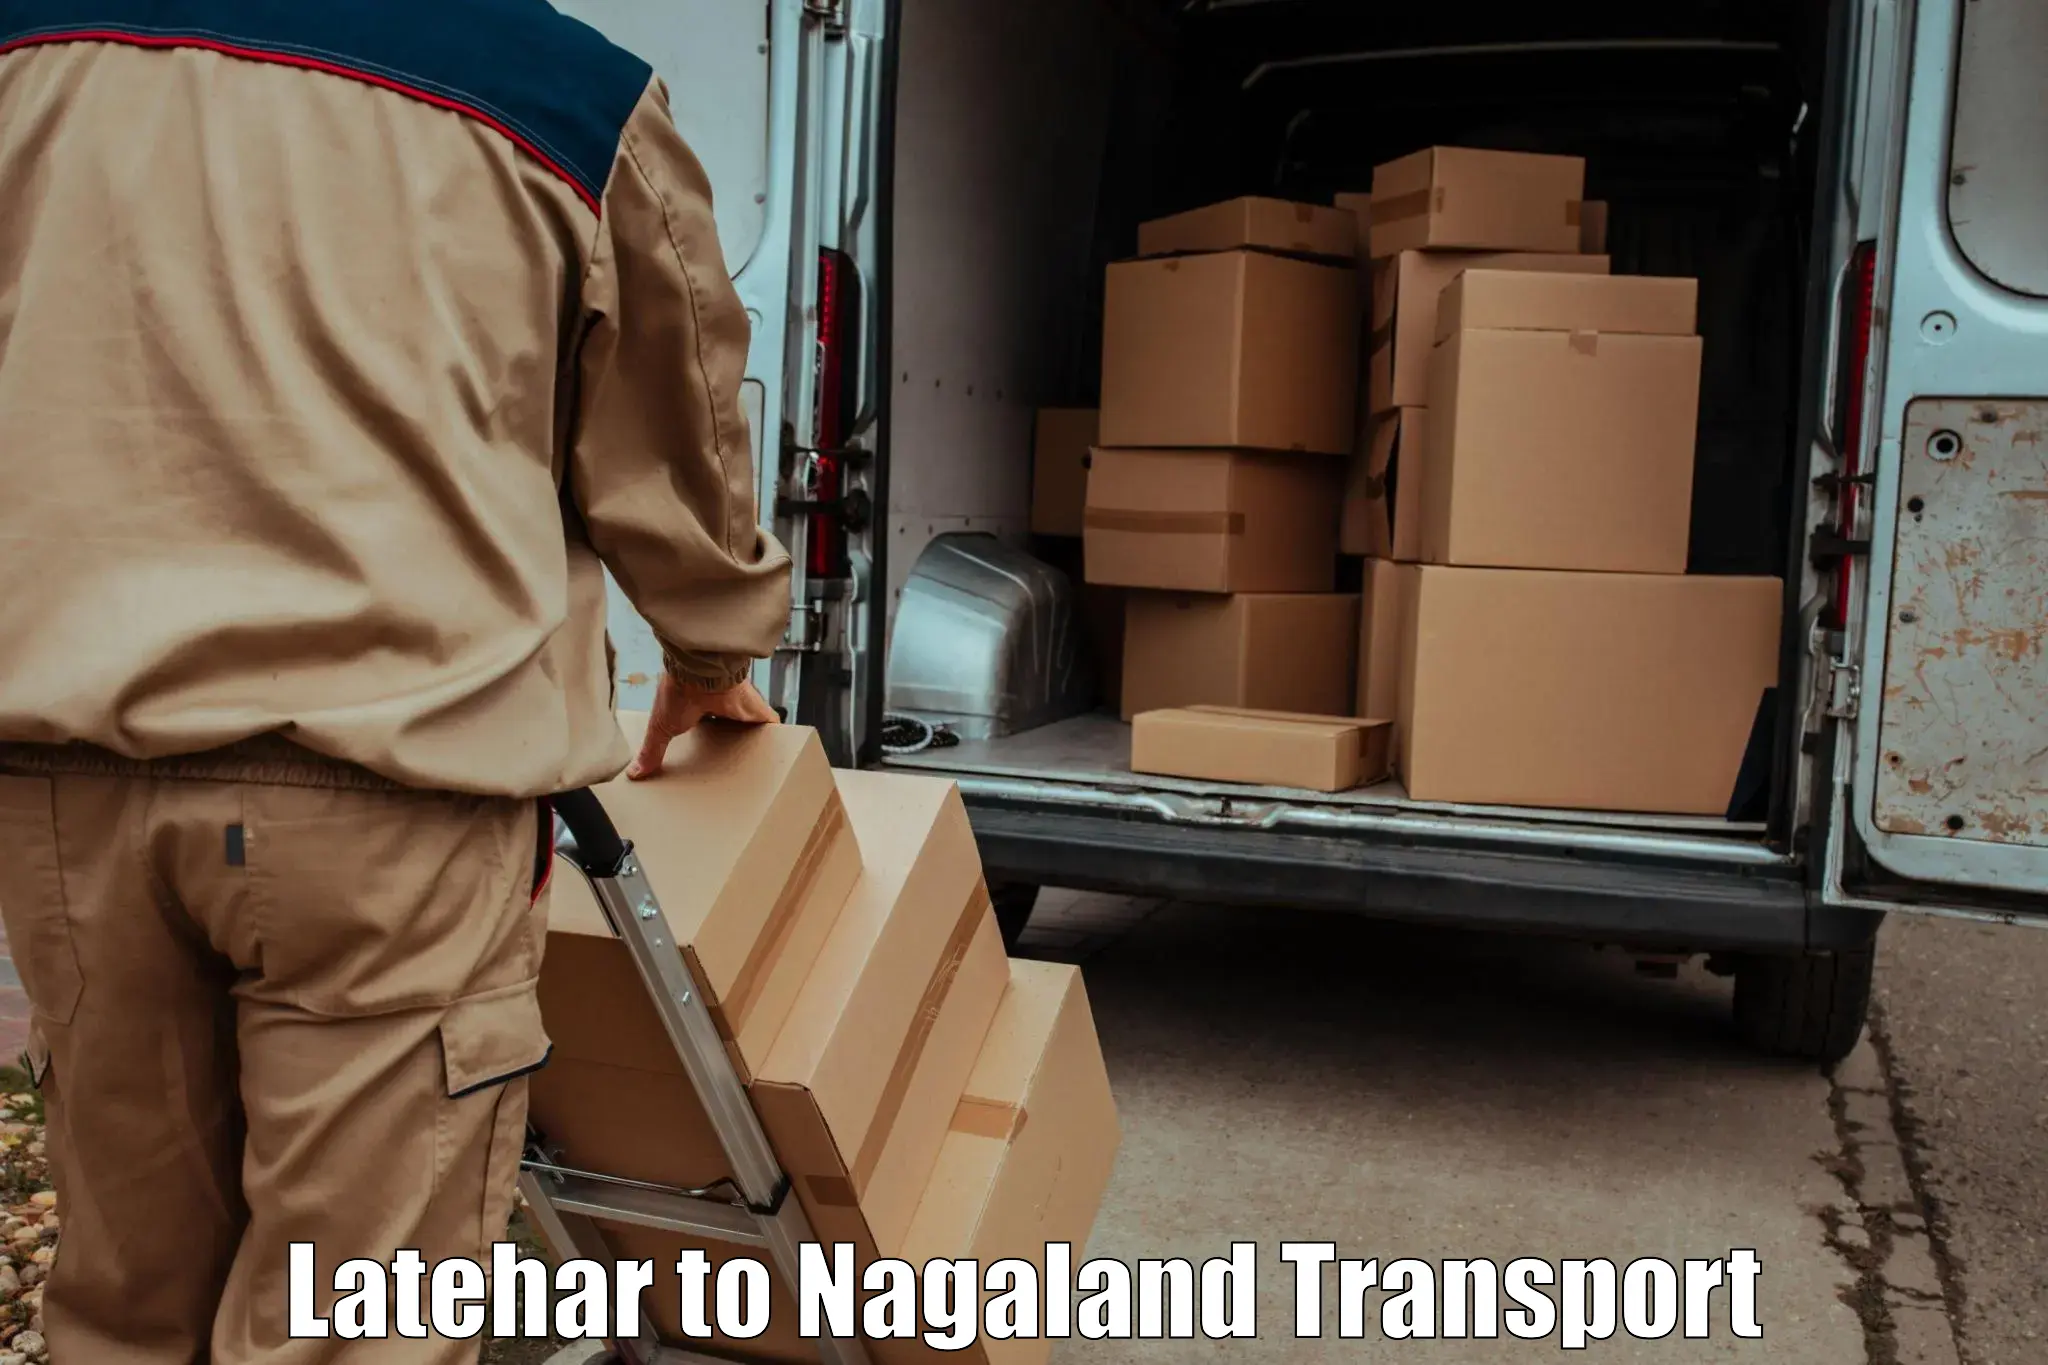 Truck transport companies in India Latehar to Nagaland